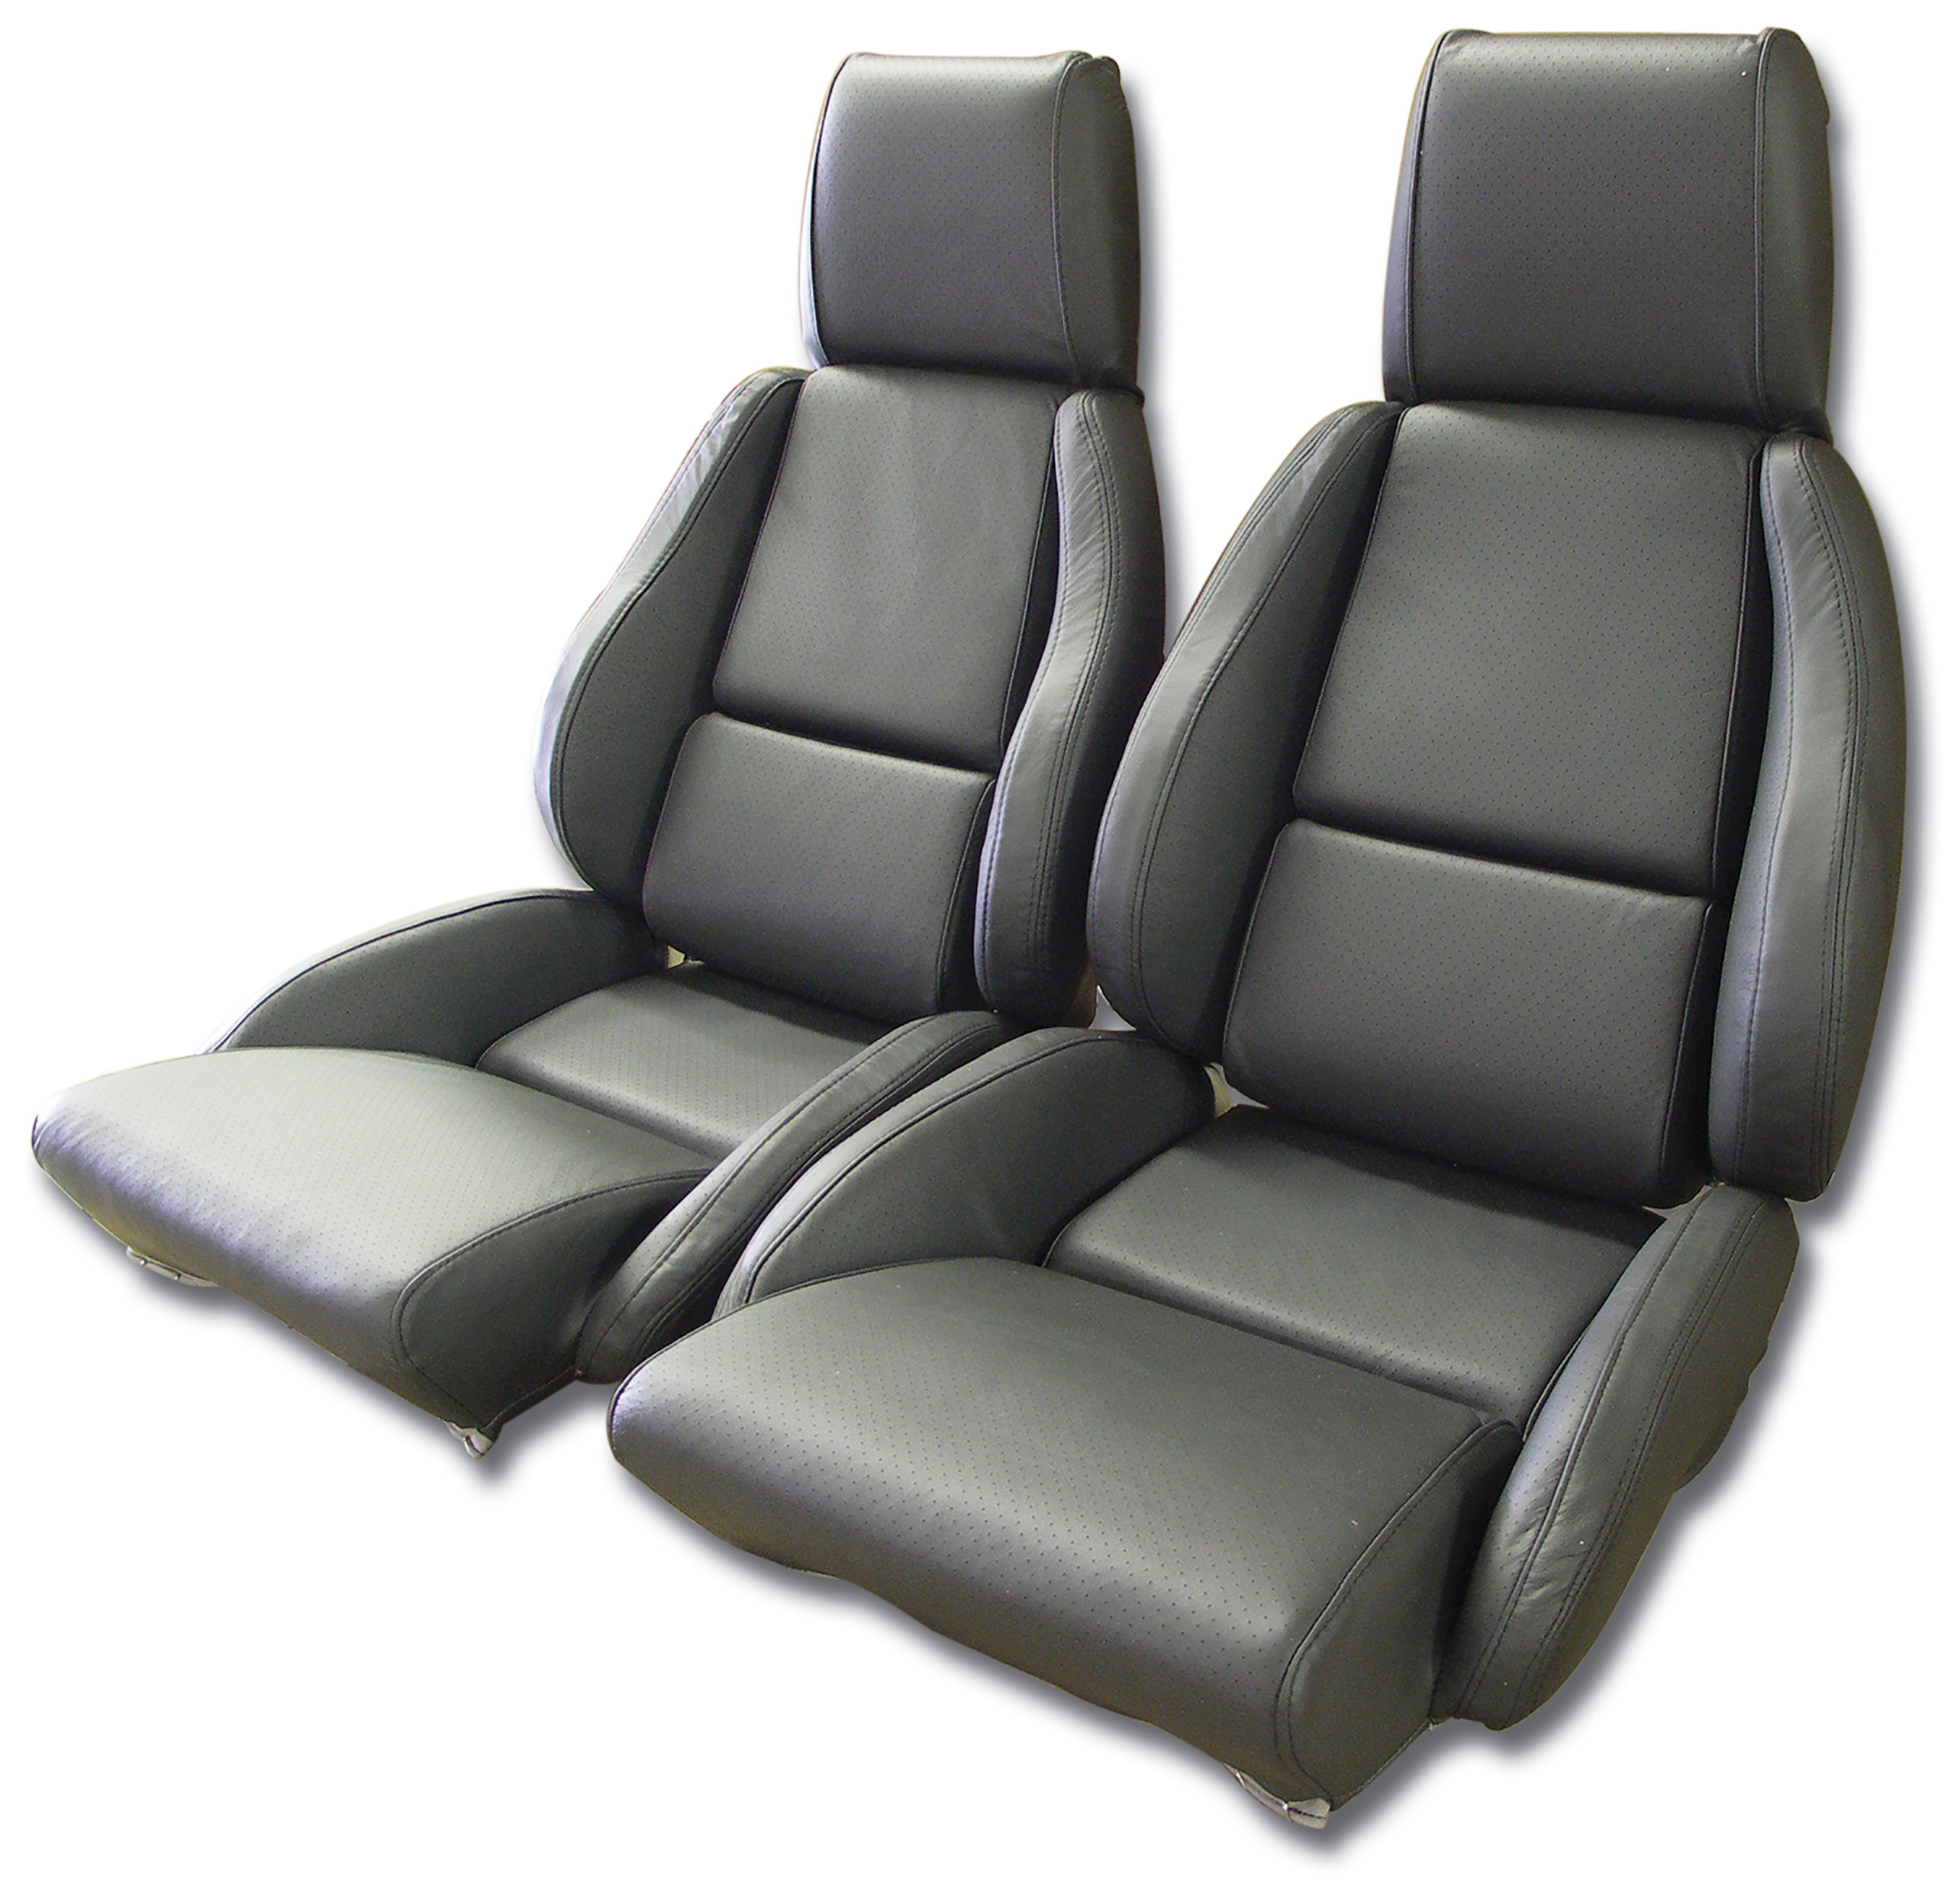 1984-1987 C4 Corvette Mounted Leather Seat Covers Graphite Standard